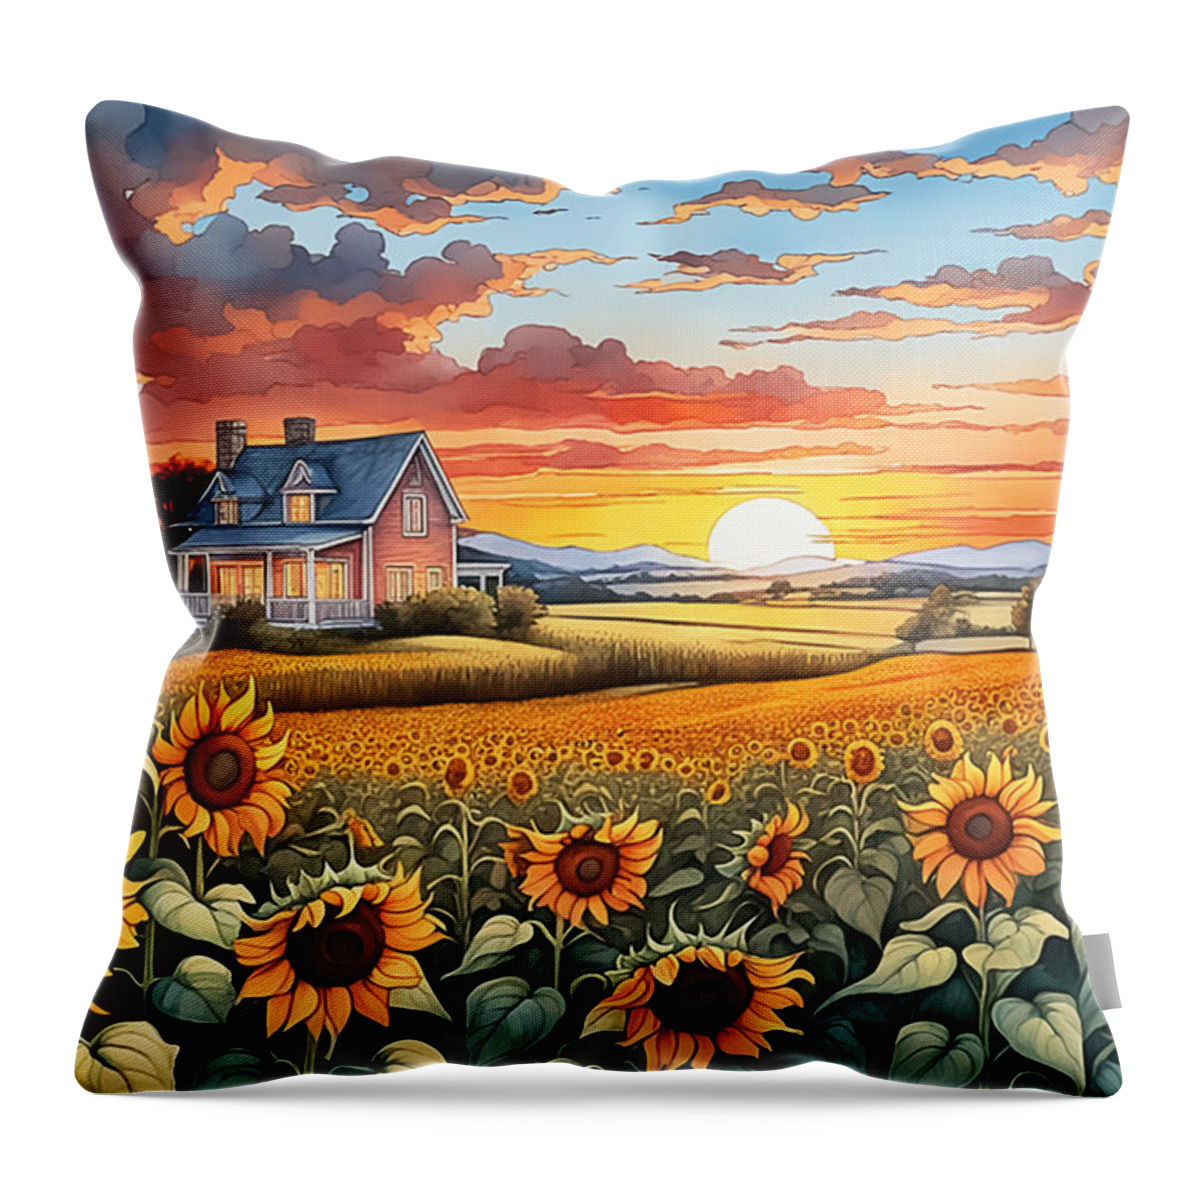 House Throw Pillow featuring the digital art Sunset In The Countryside by Manjik Pictures